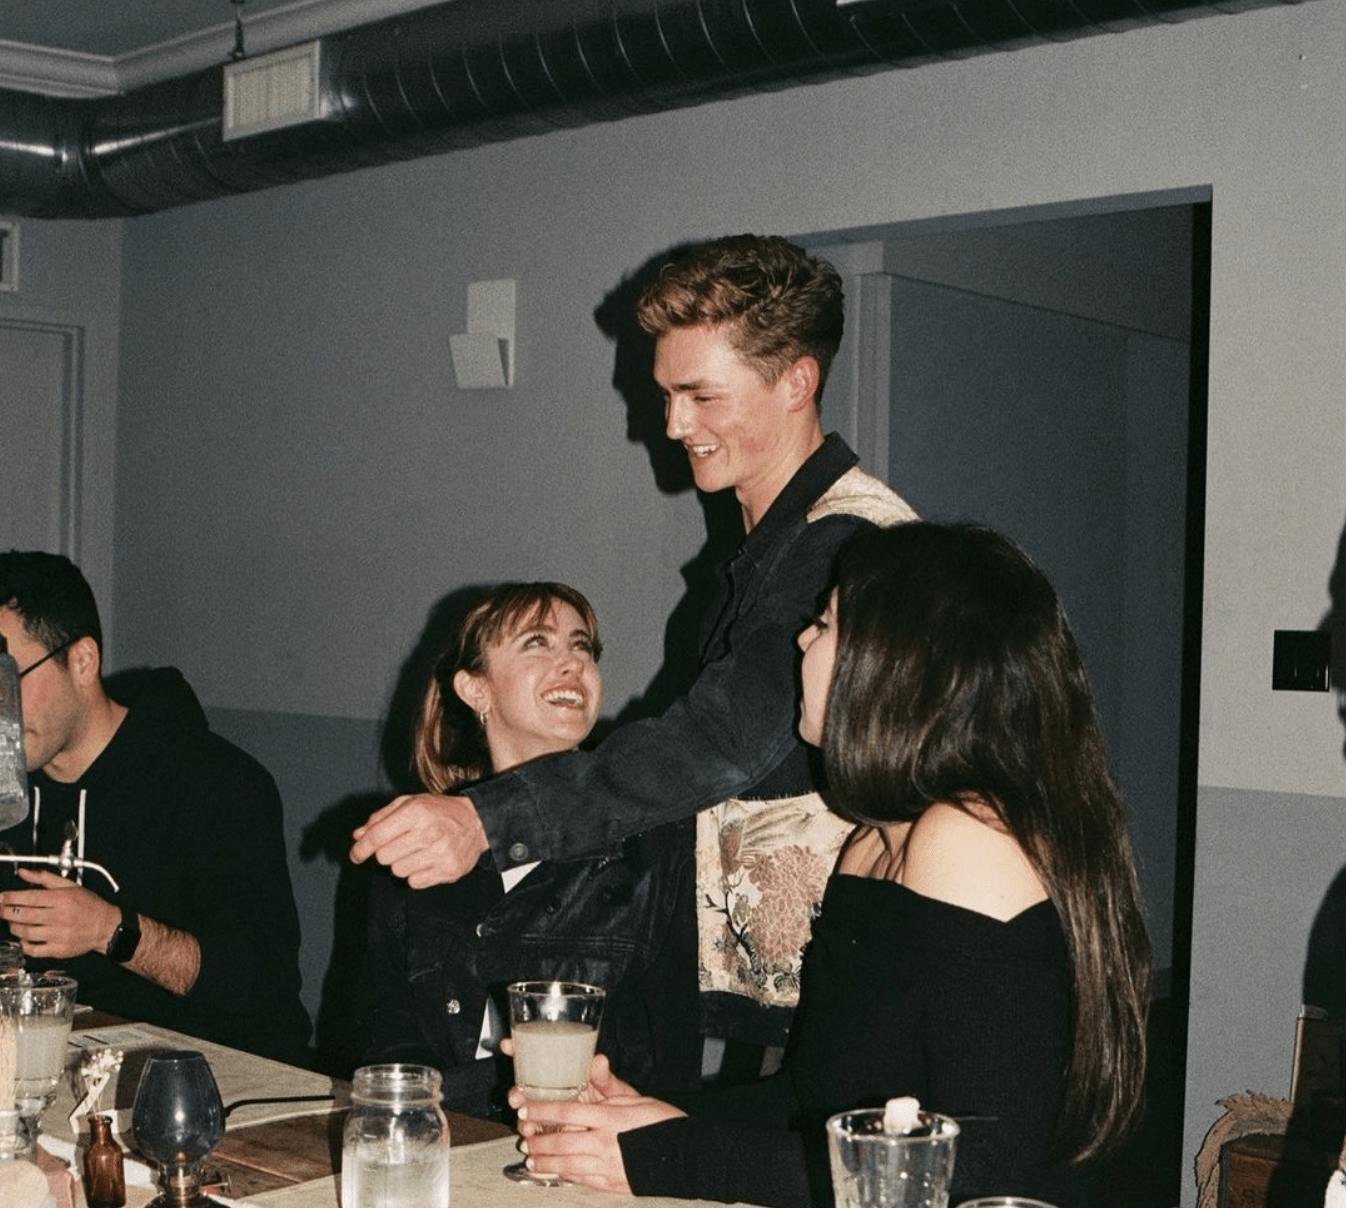 A film photo from a supper club dinner